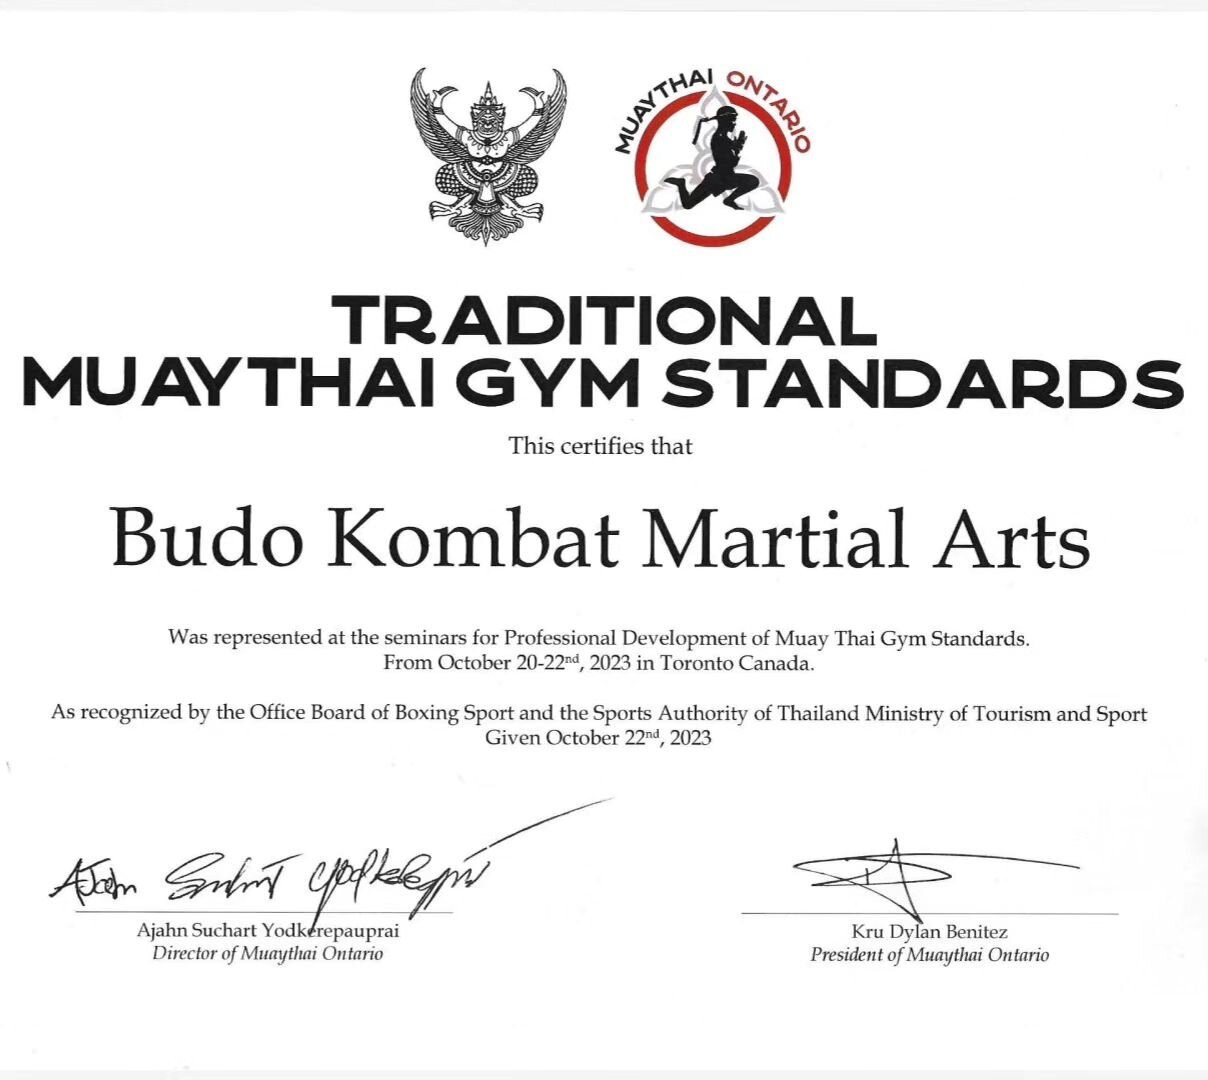 Thank you #muaythaiontario team, for your open and inclusive efforts in the development and growth of Traditional and Quality Muay Thai in Ontario and Canada.

Proud to be under the umbrella of an experienced, skilled, passionate, focused and goal-or